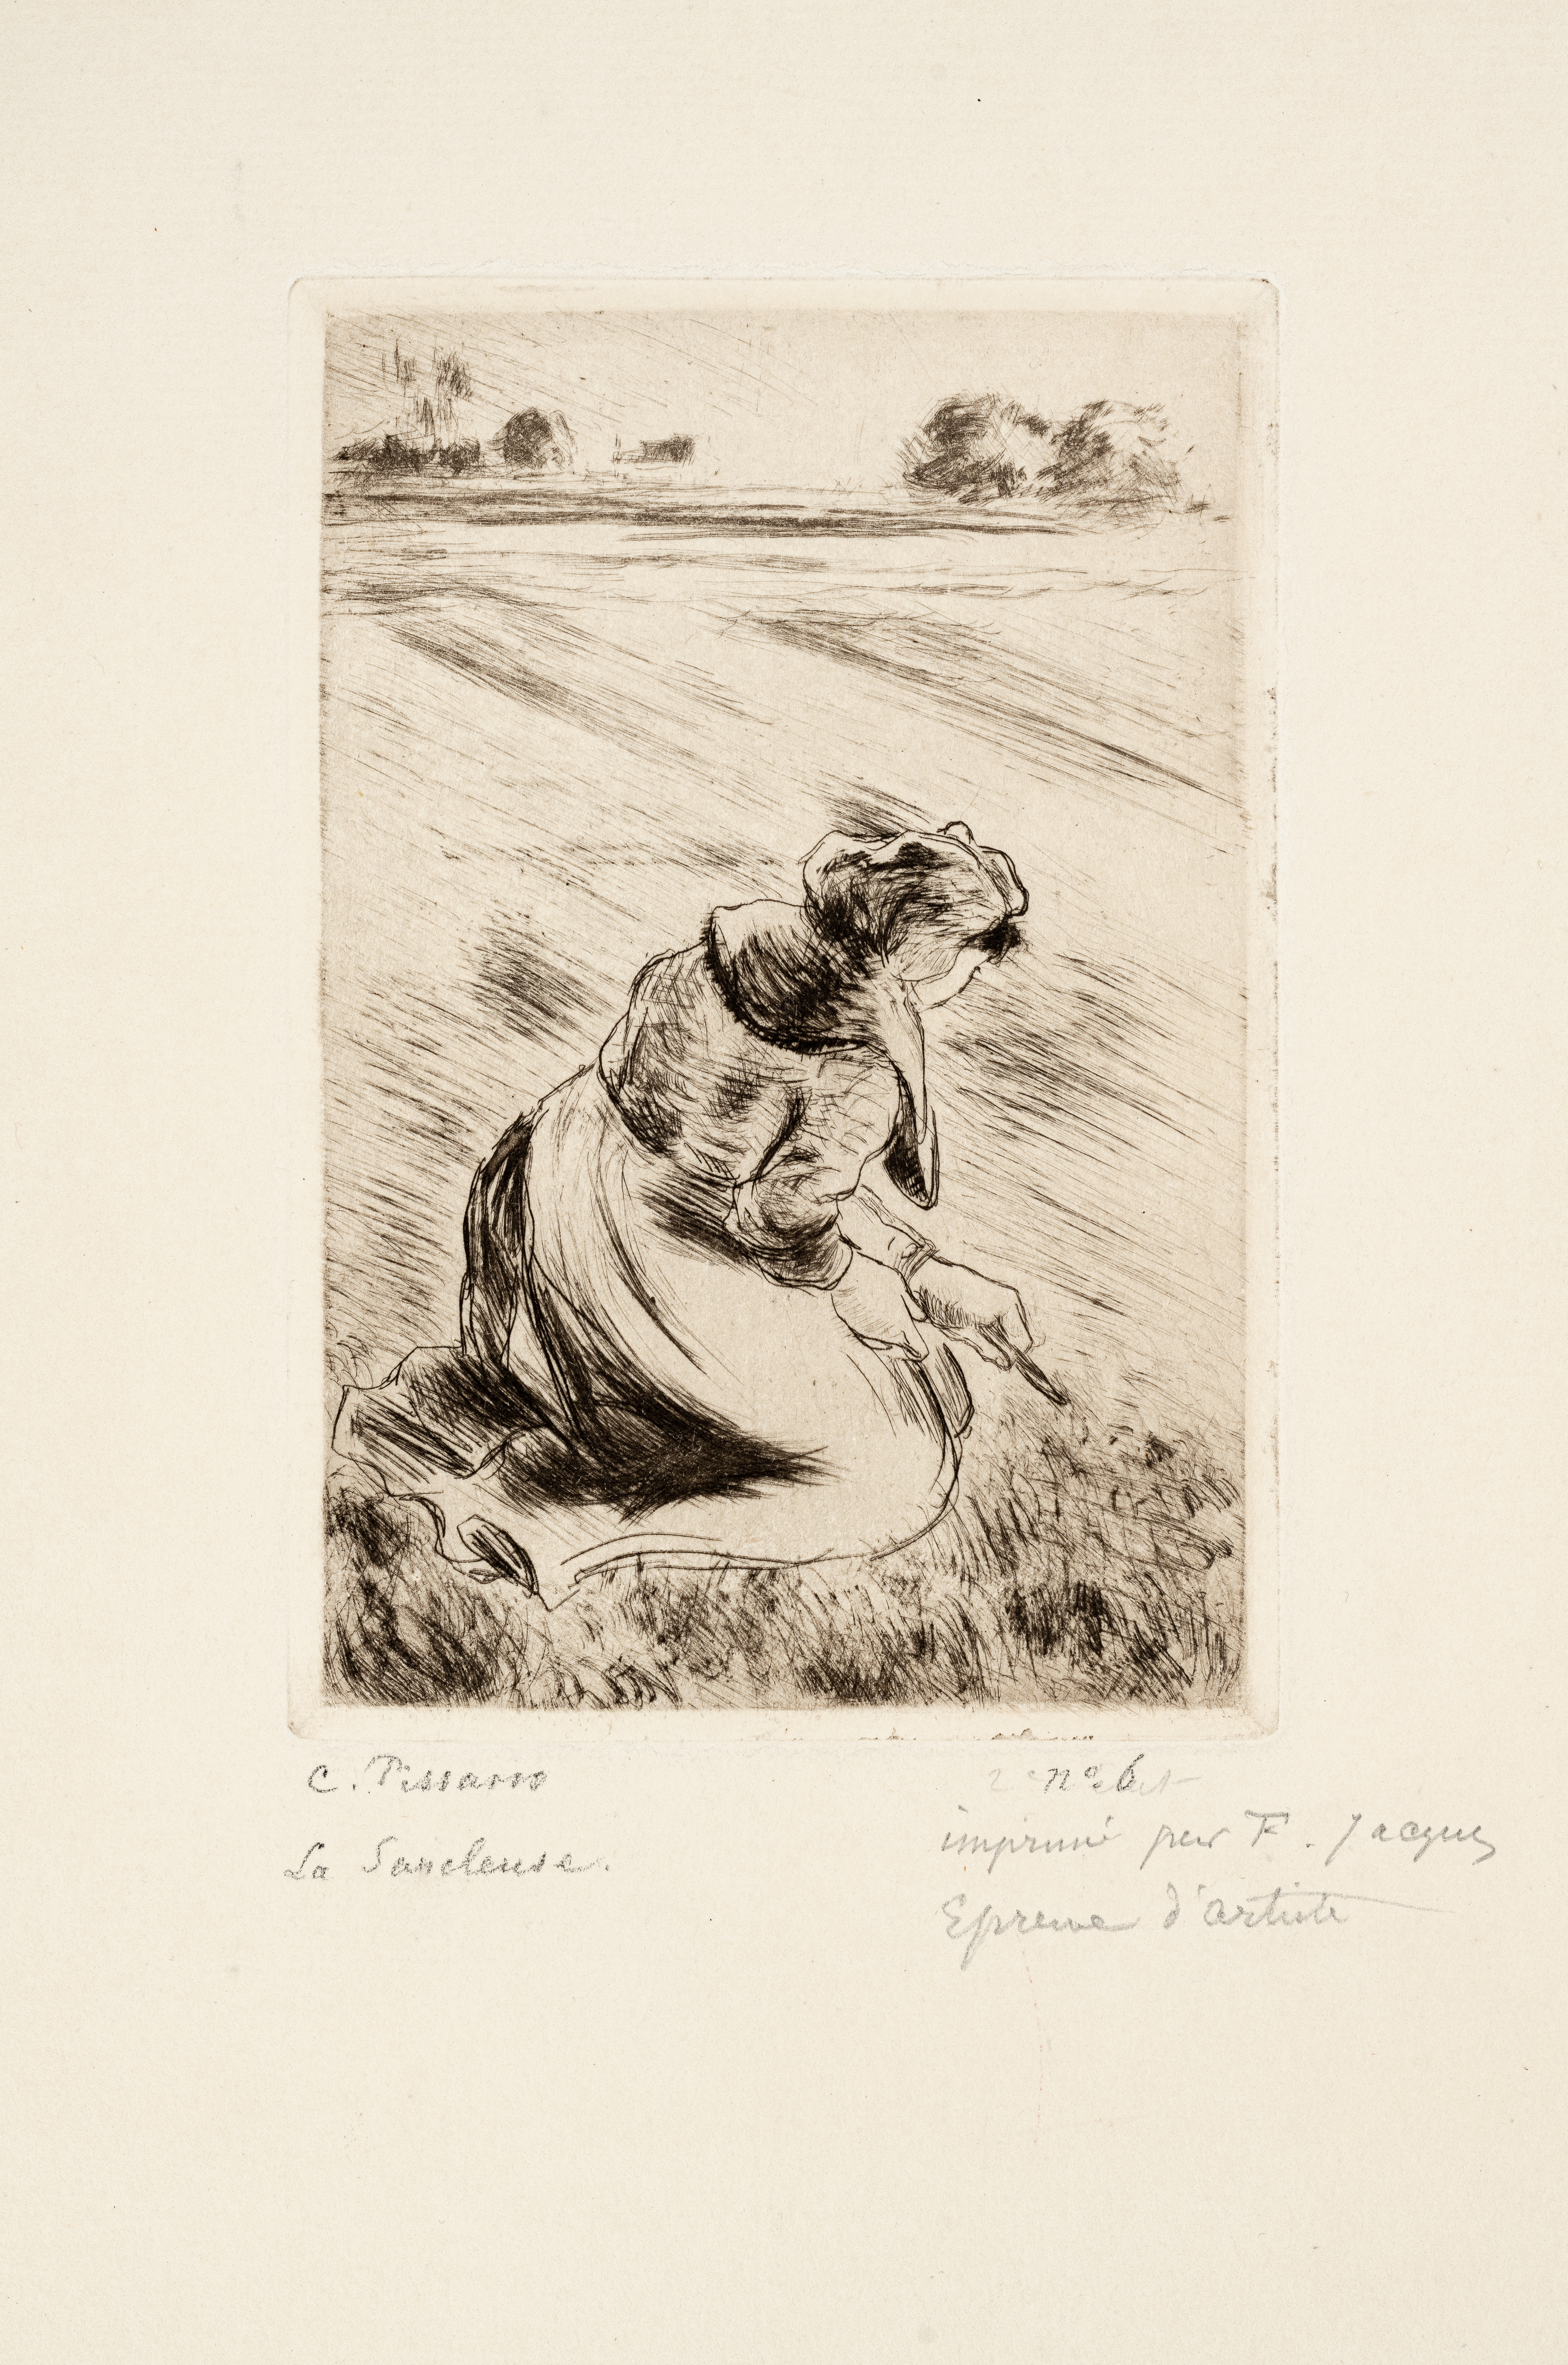 Camille Pissarro, La Sarcleuse, etching with drypoint, circa 1887-88